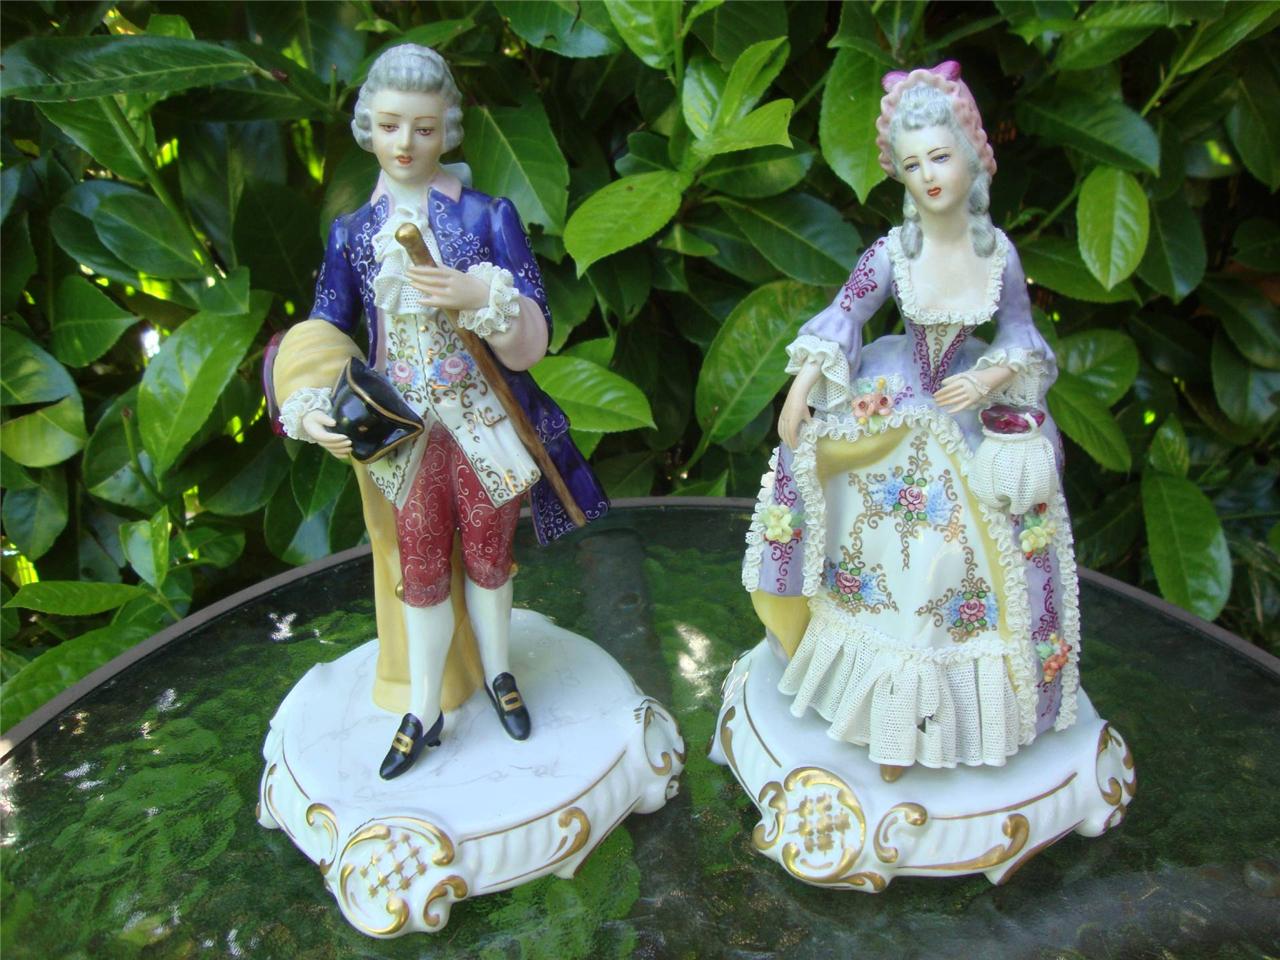 LOVELY PAIR PORCELAIN CAPODIMONTE FIGURES OF LADY AND GENT DRESDEN LACE - Afbeelding 1 van 1